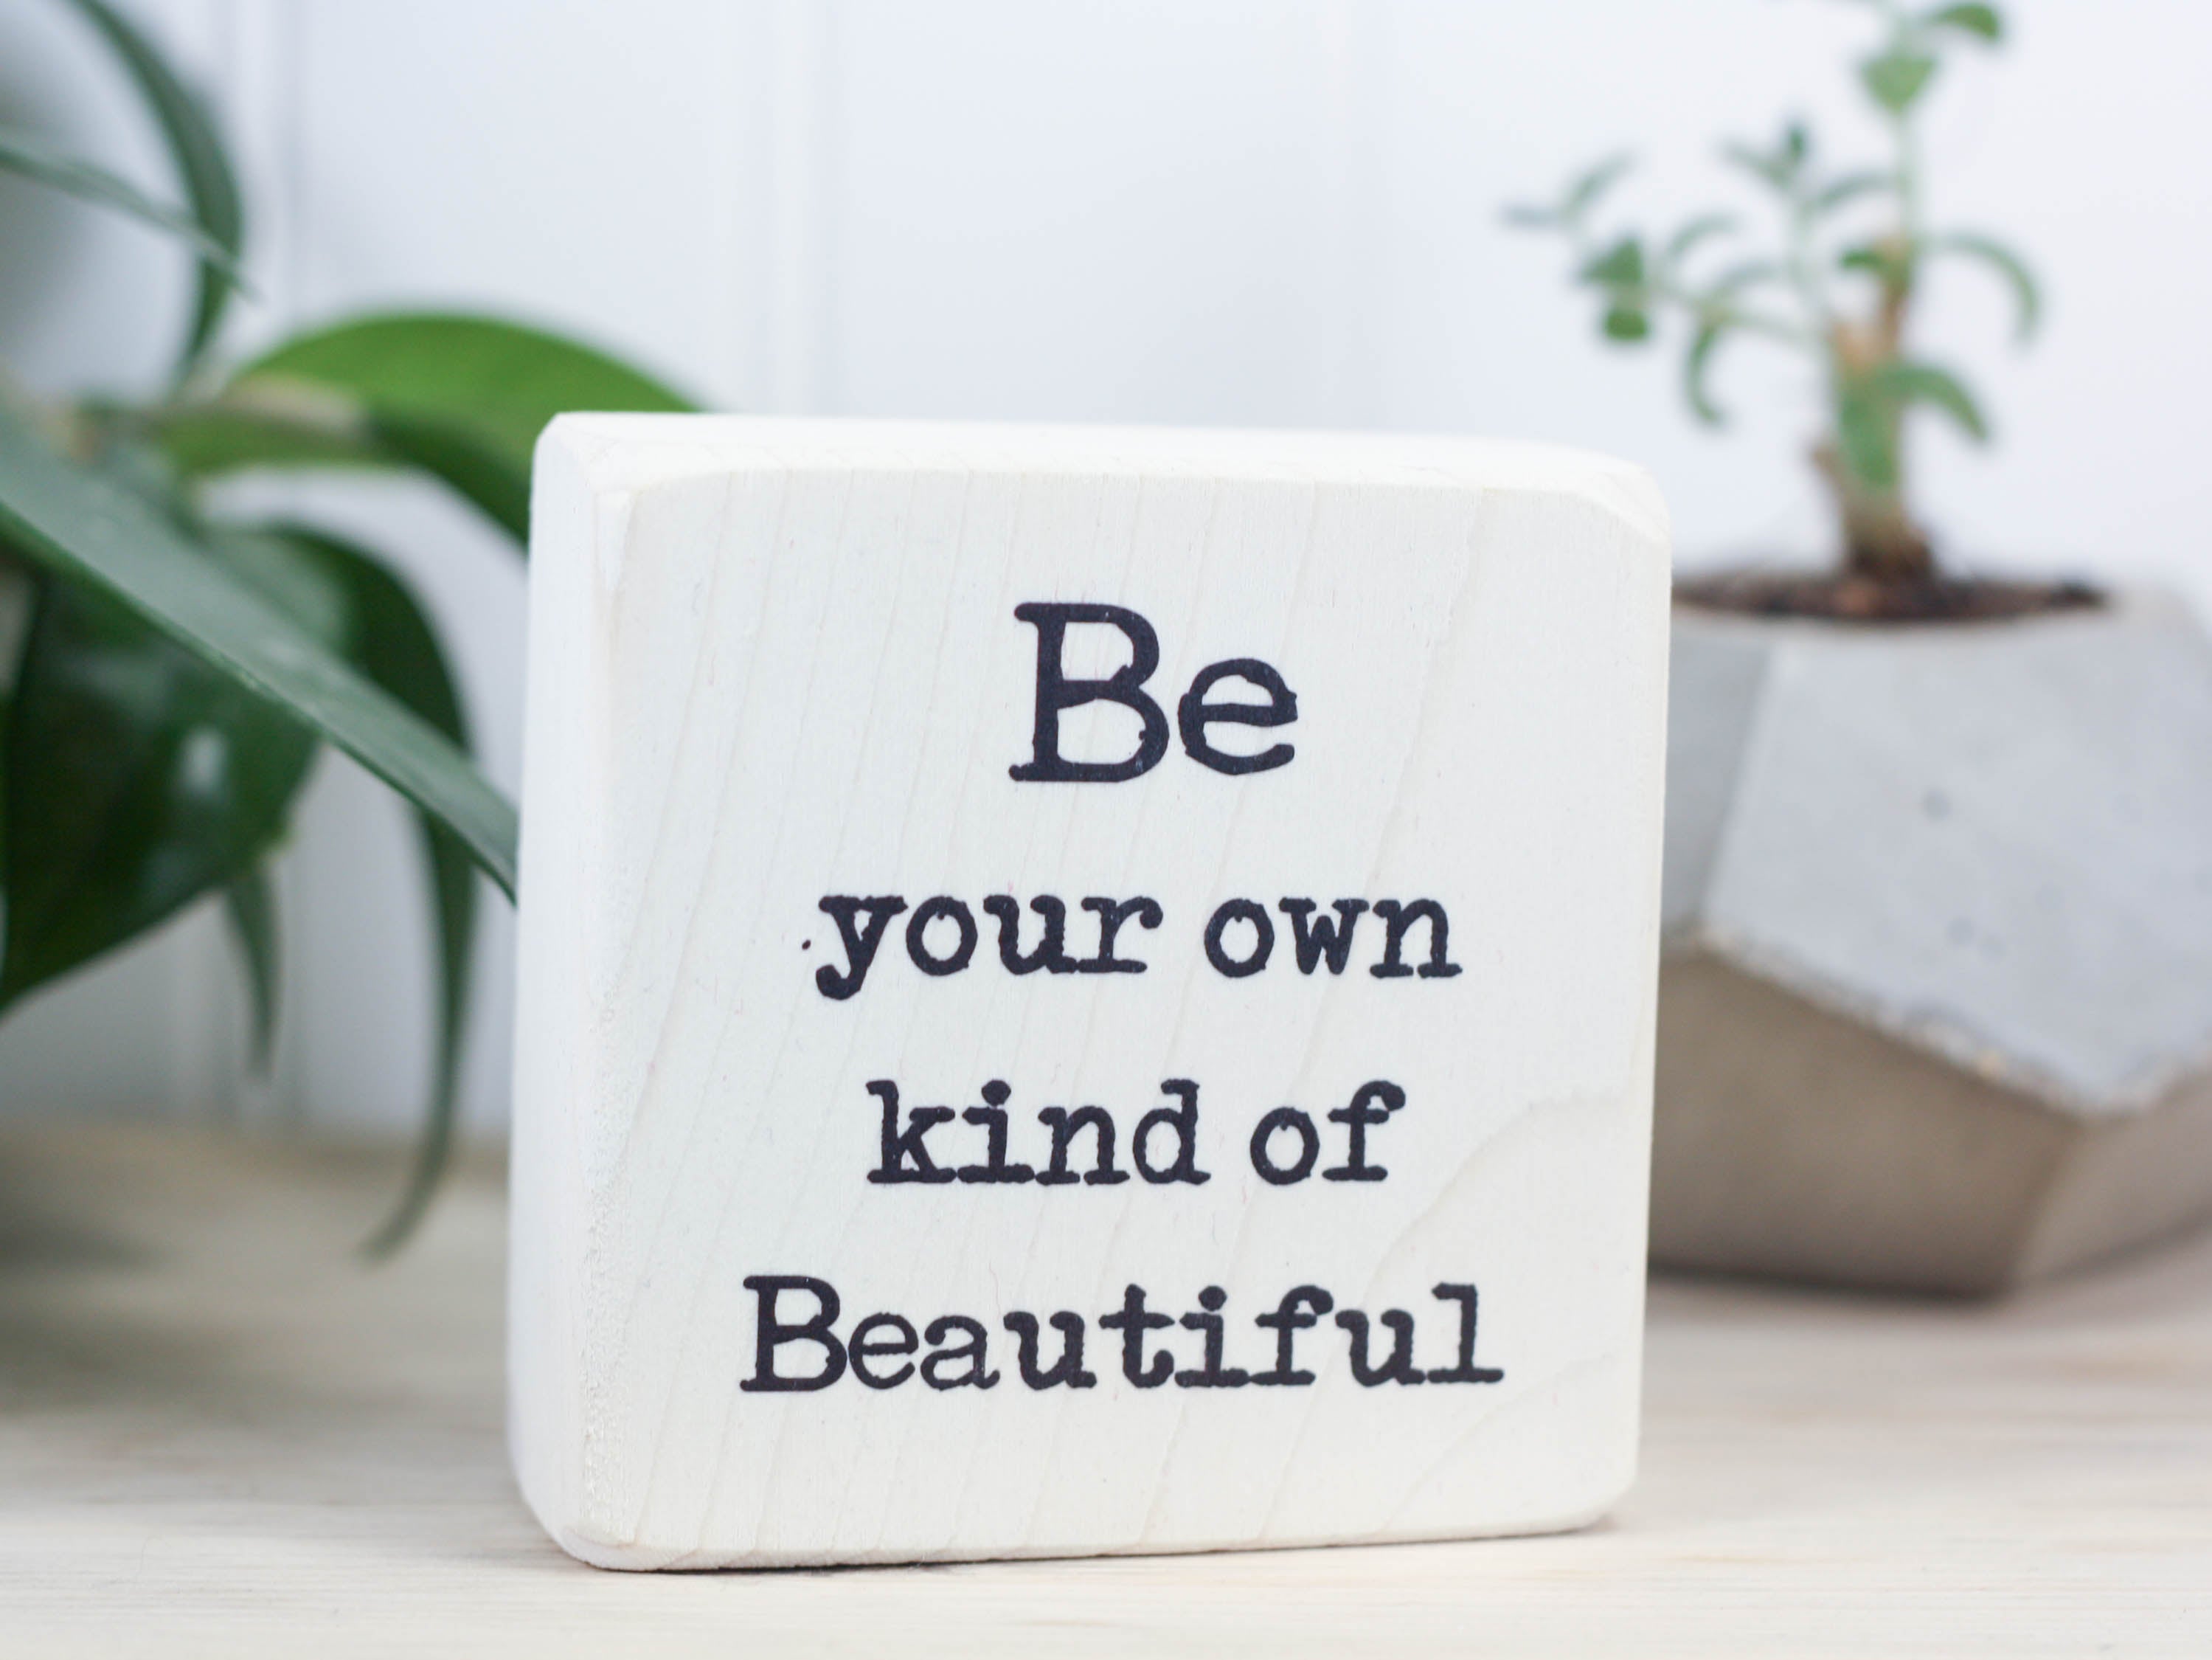 Small freestanding shelf decor in whitewash with the saying "Be your own kind of Beautiful".